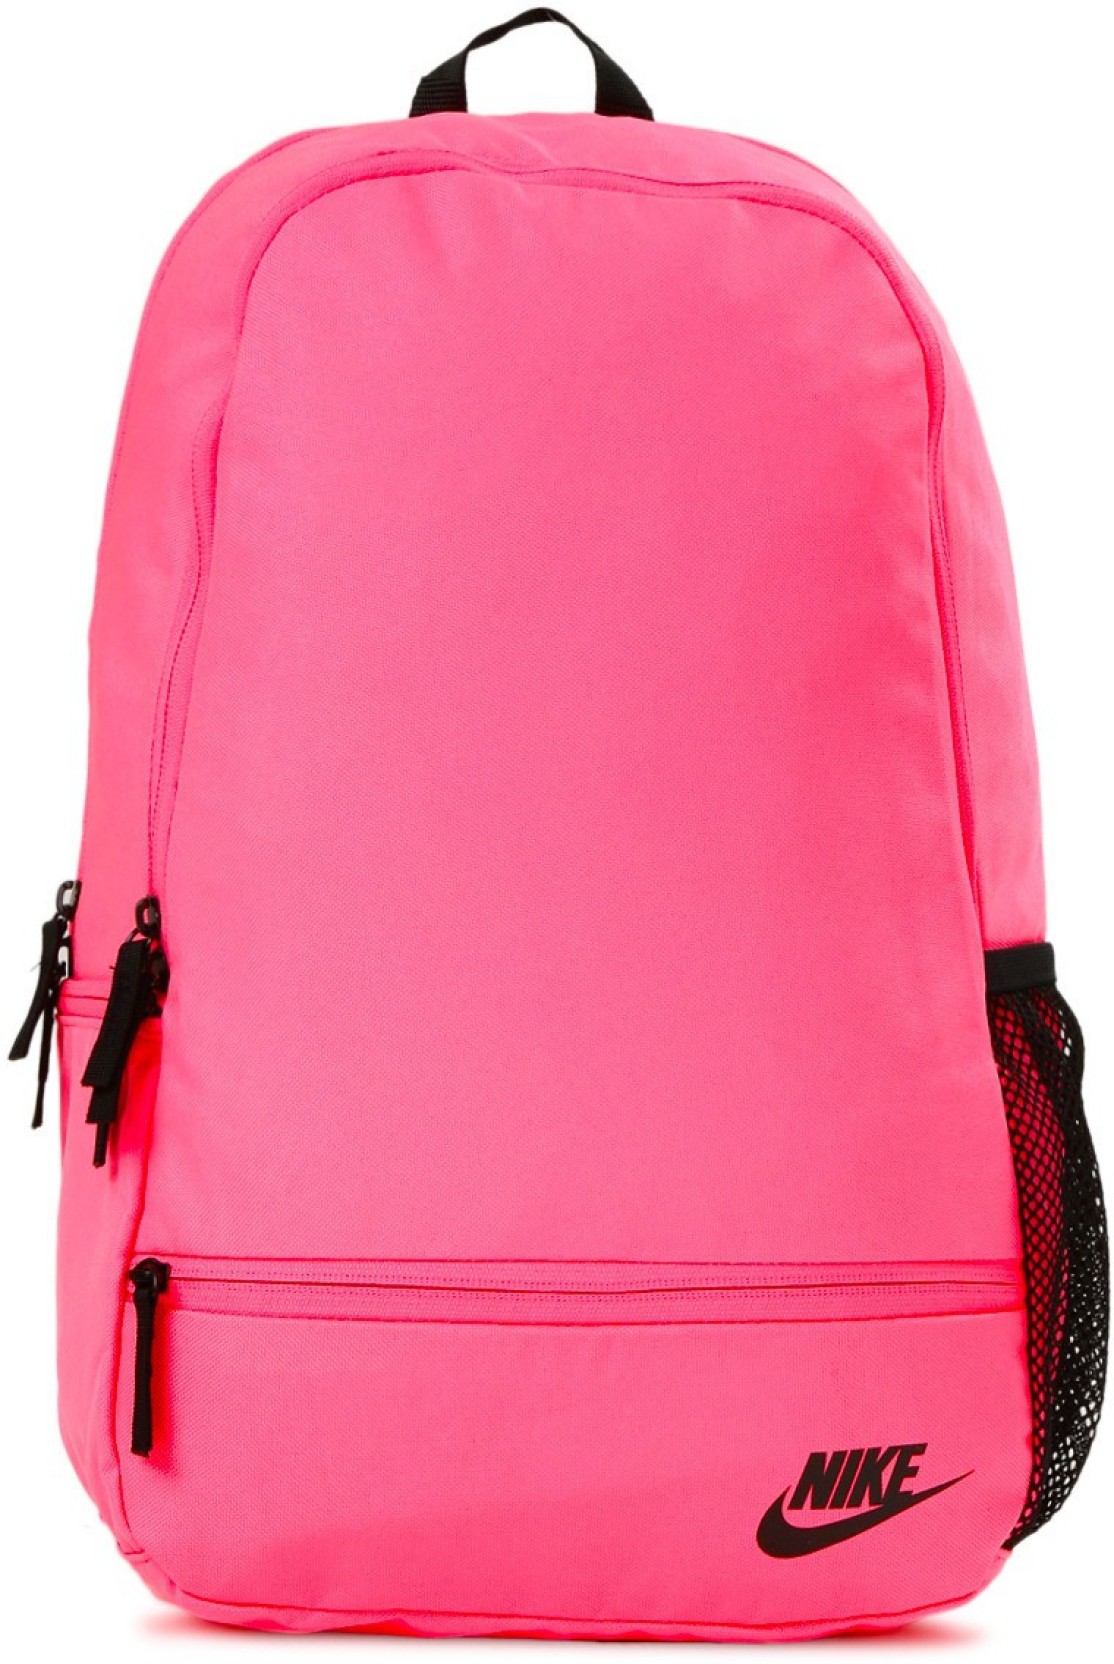 Nike Classic North 22 L Backpack Neon Pink - Price in India | Flipkart.com